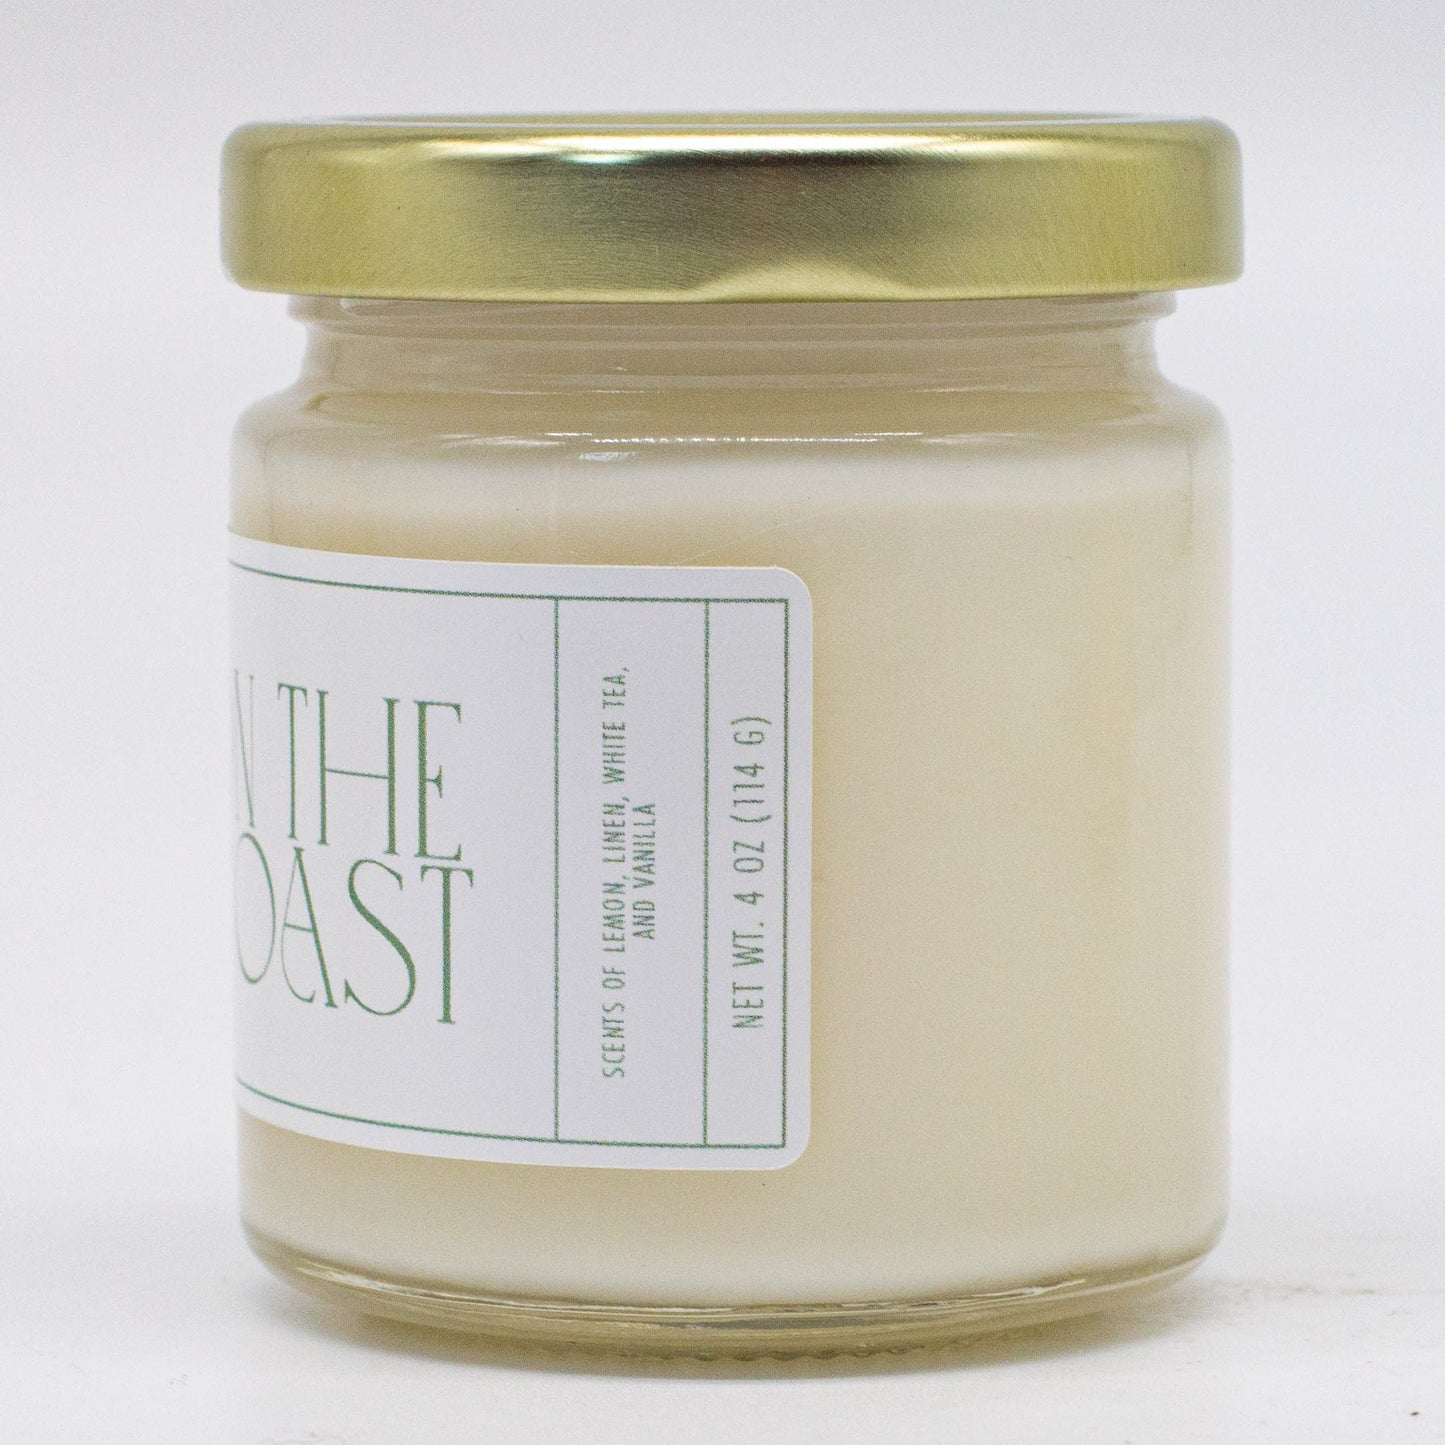 On The Coast - Rose and Lily Soy Candle